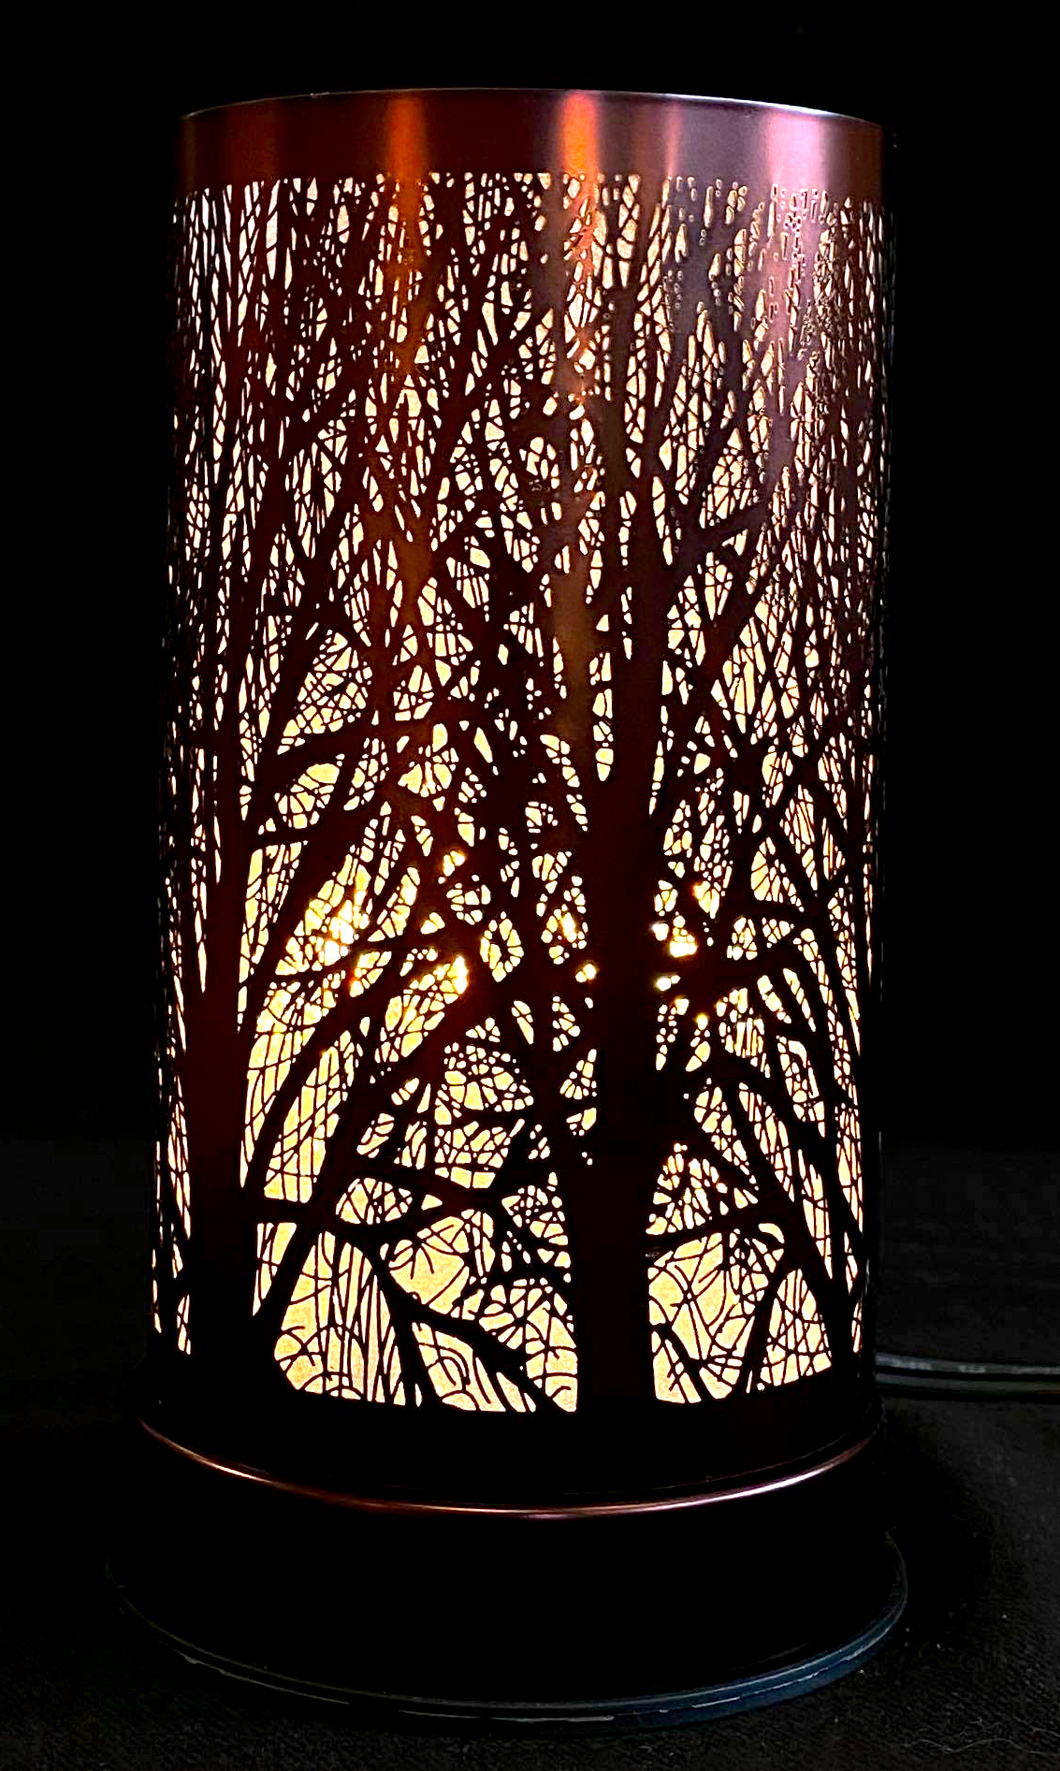 bronze coloured cylindrical lamp with trees on the side against a black background